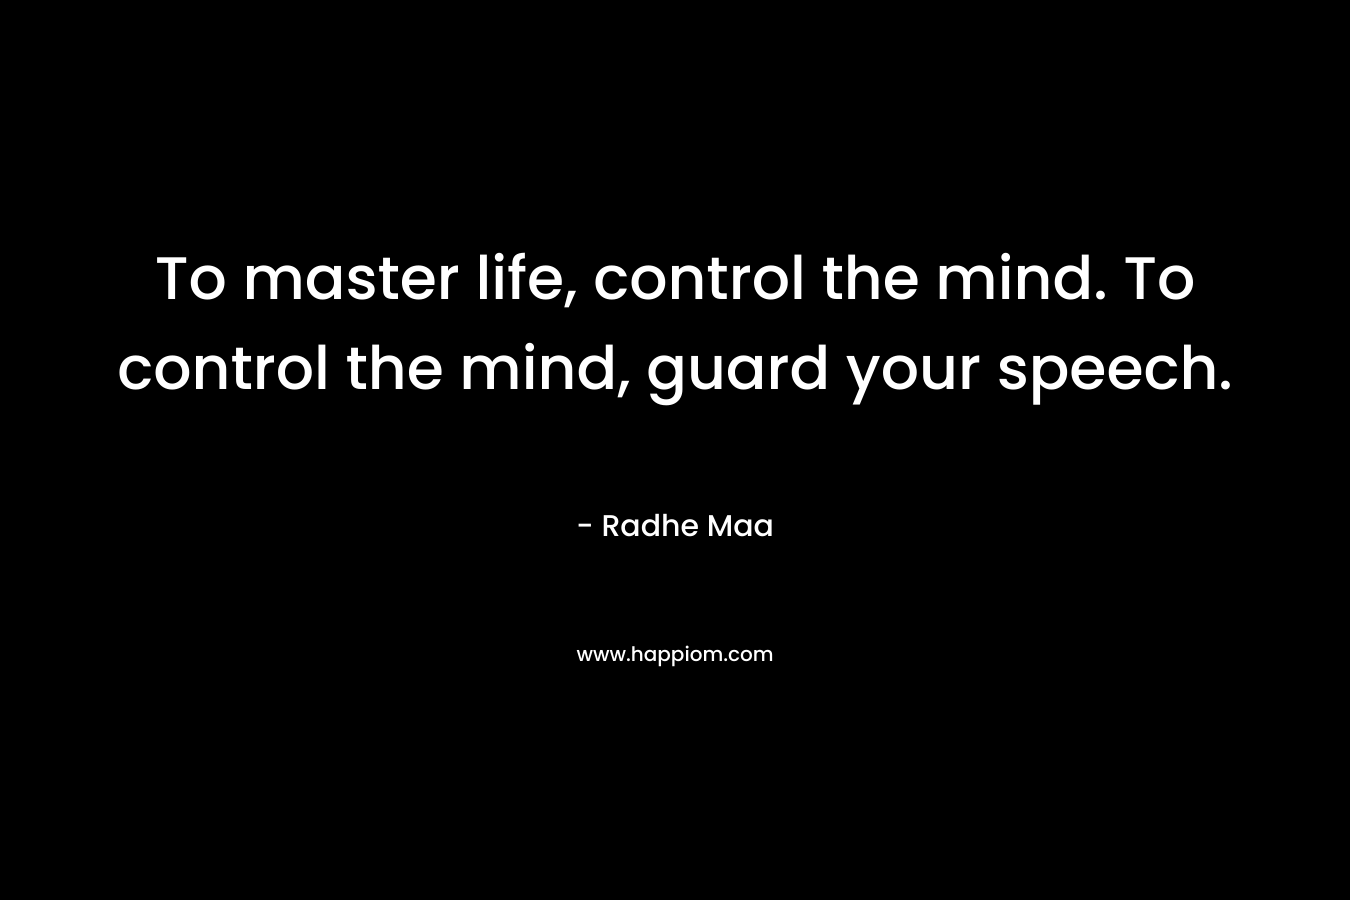 To master life, control the mind. To control the mind, guard your speech.